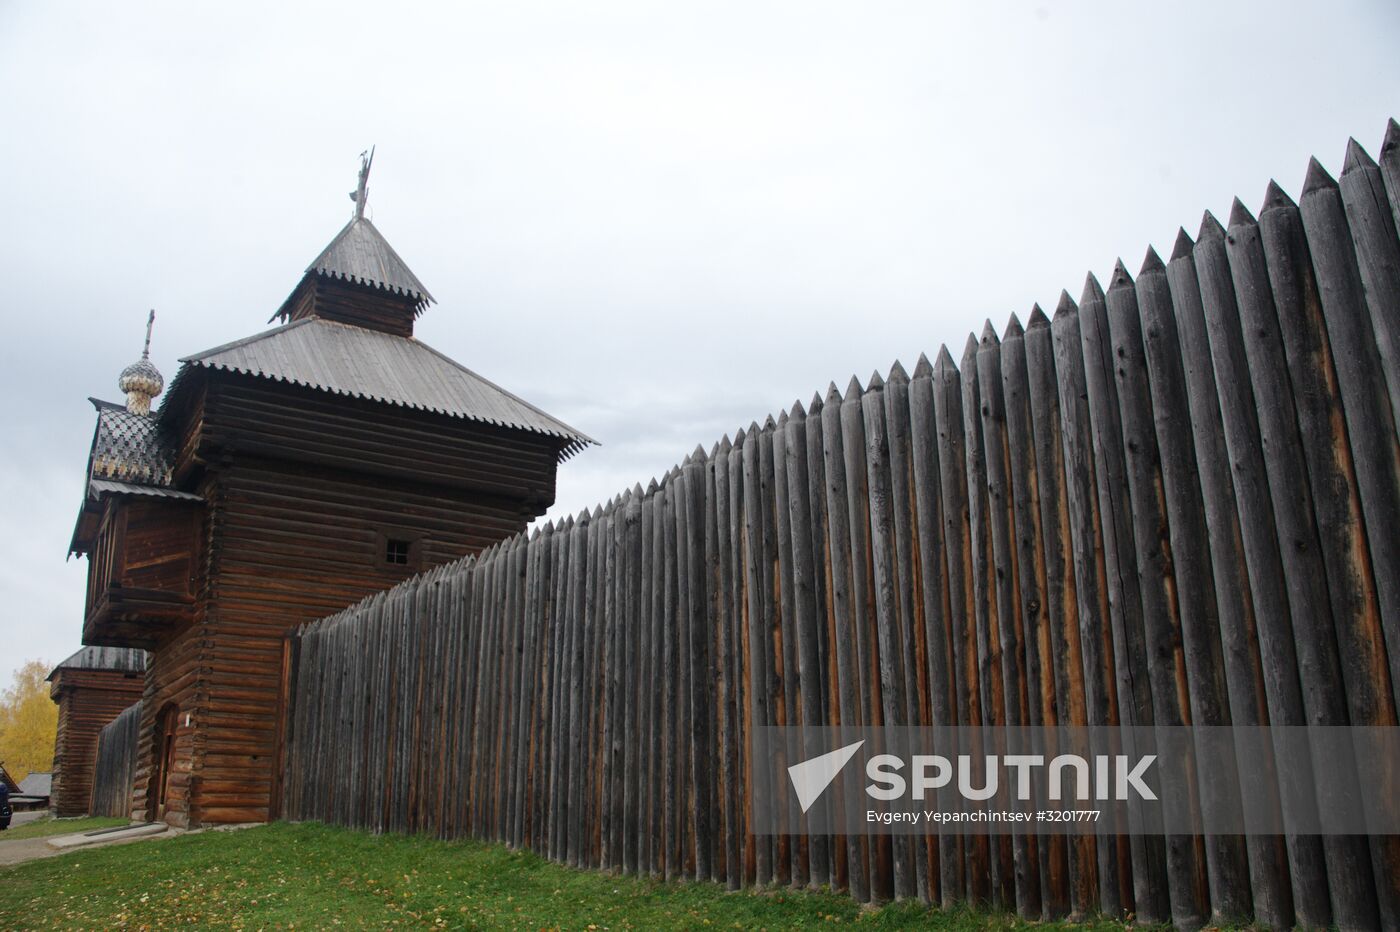 Taltsy architecture and ethnography museum in Irkutsk